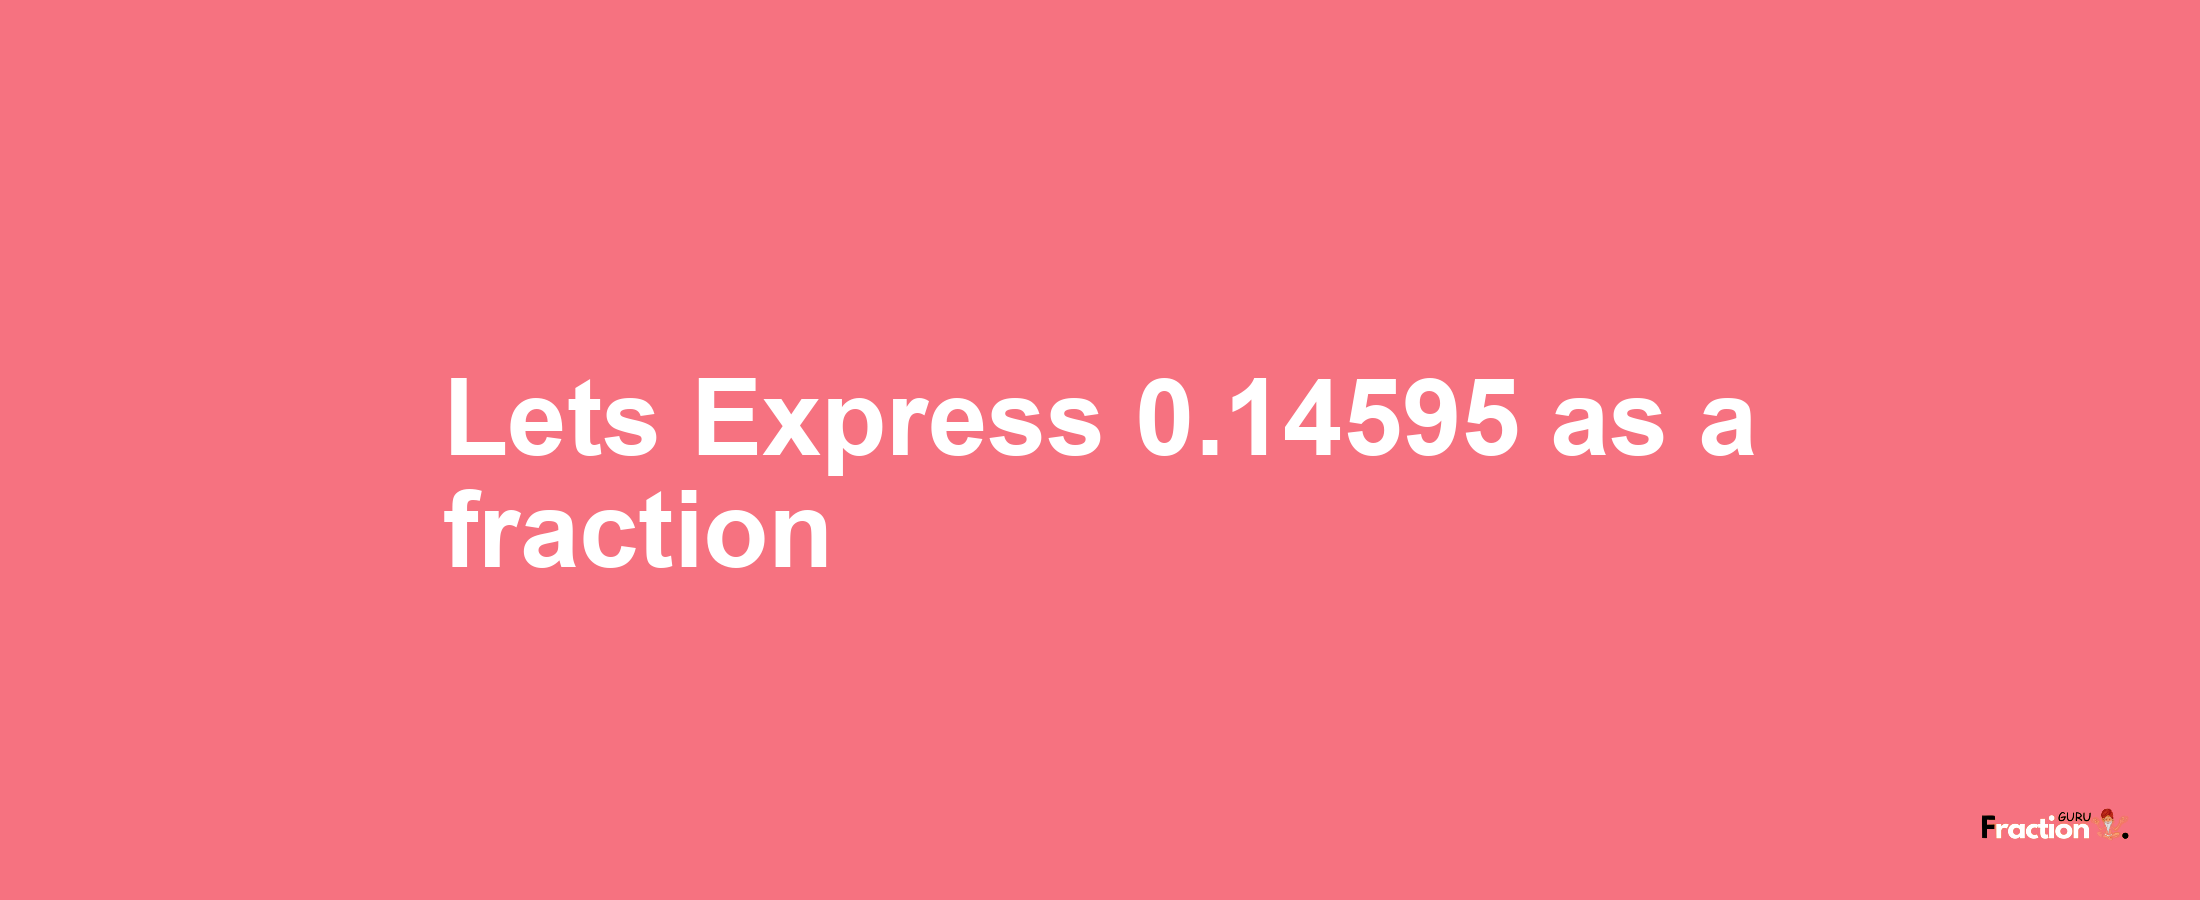 Lets Express 0.14595 as afraction